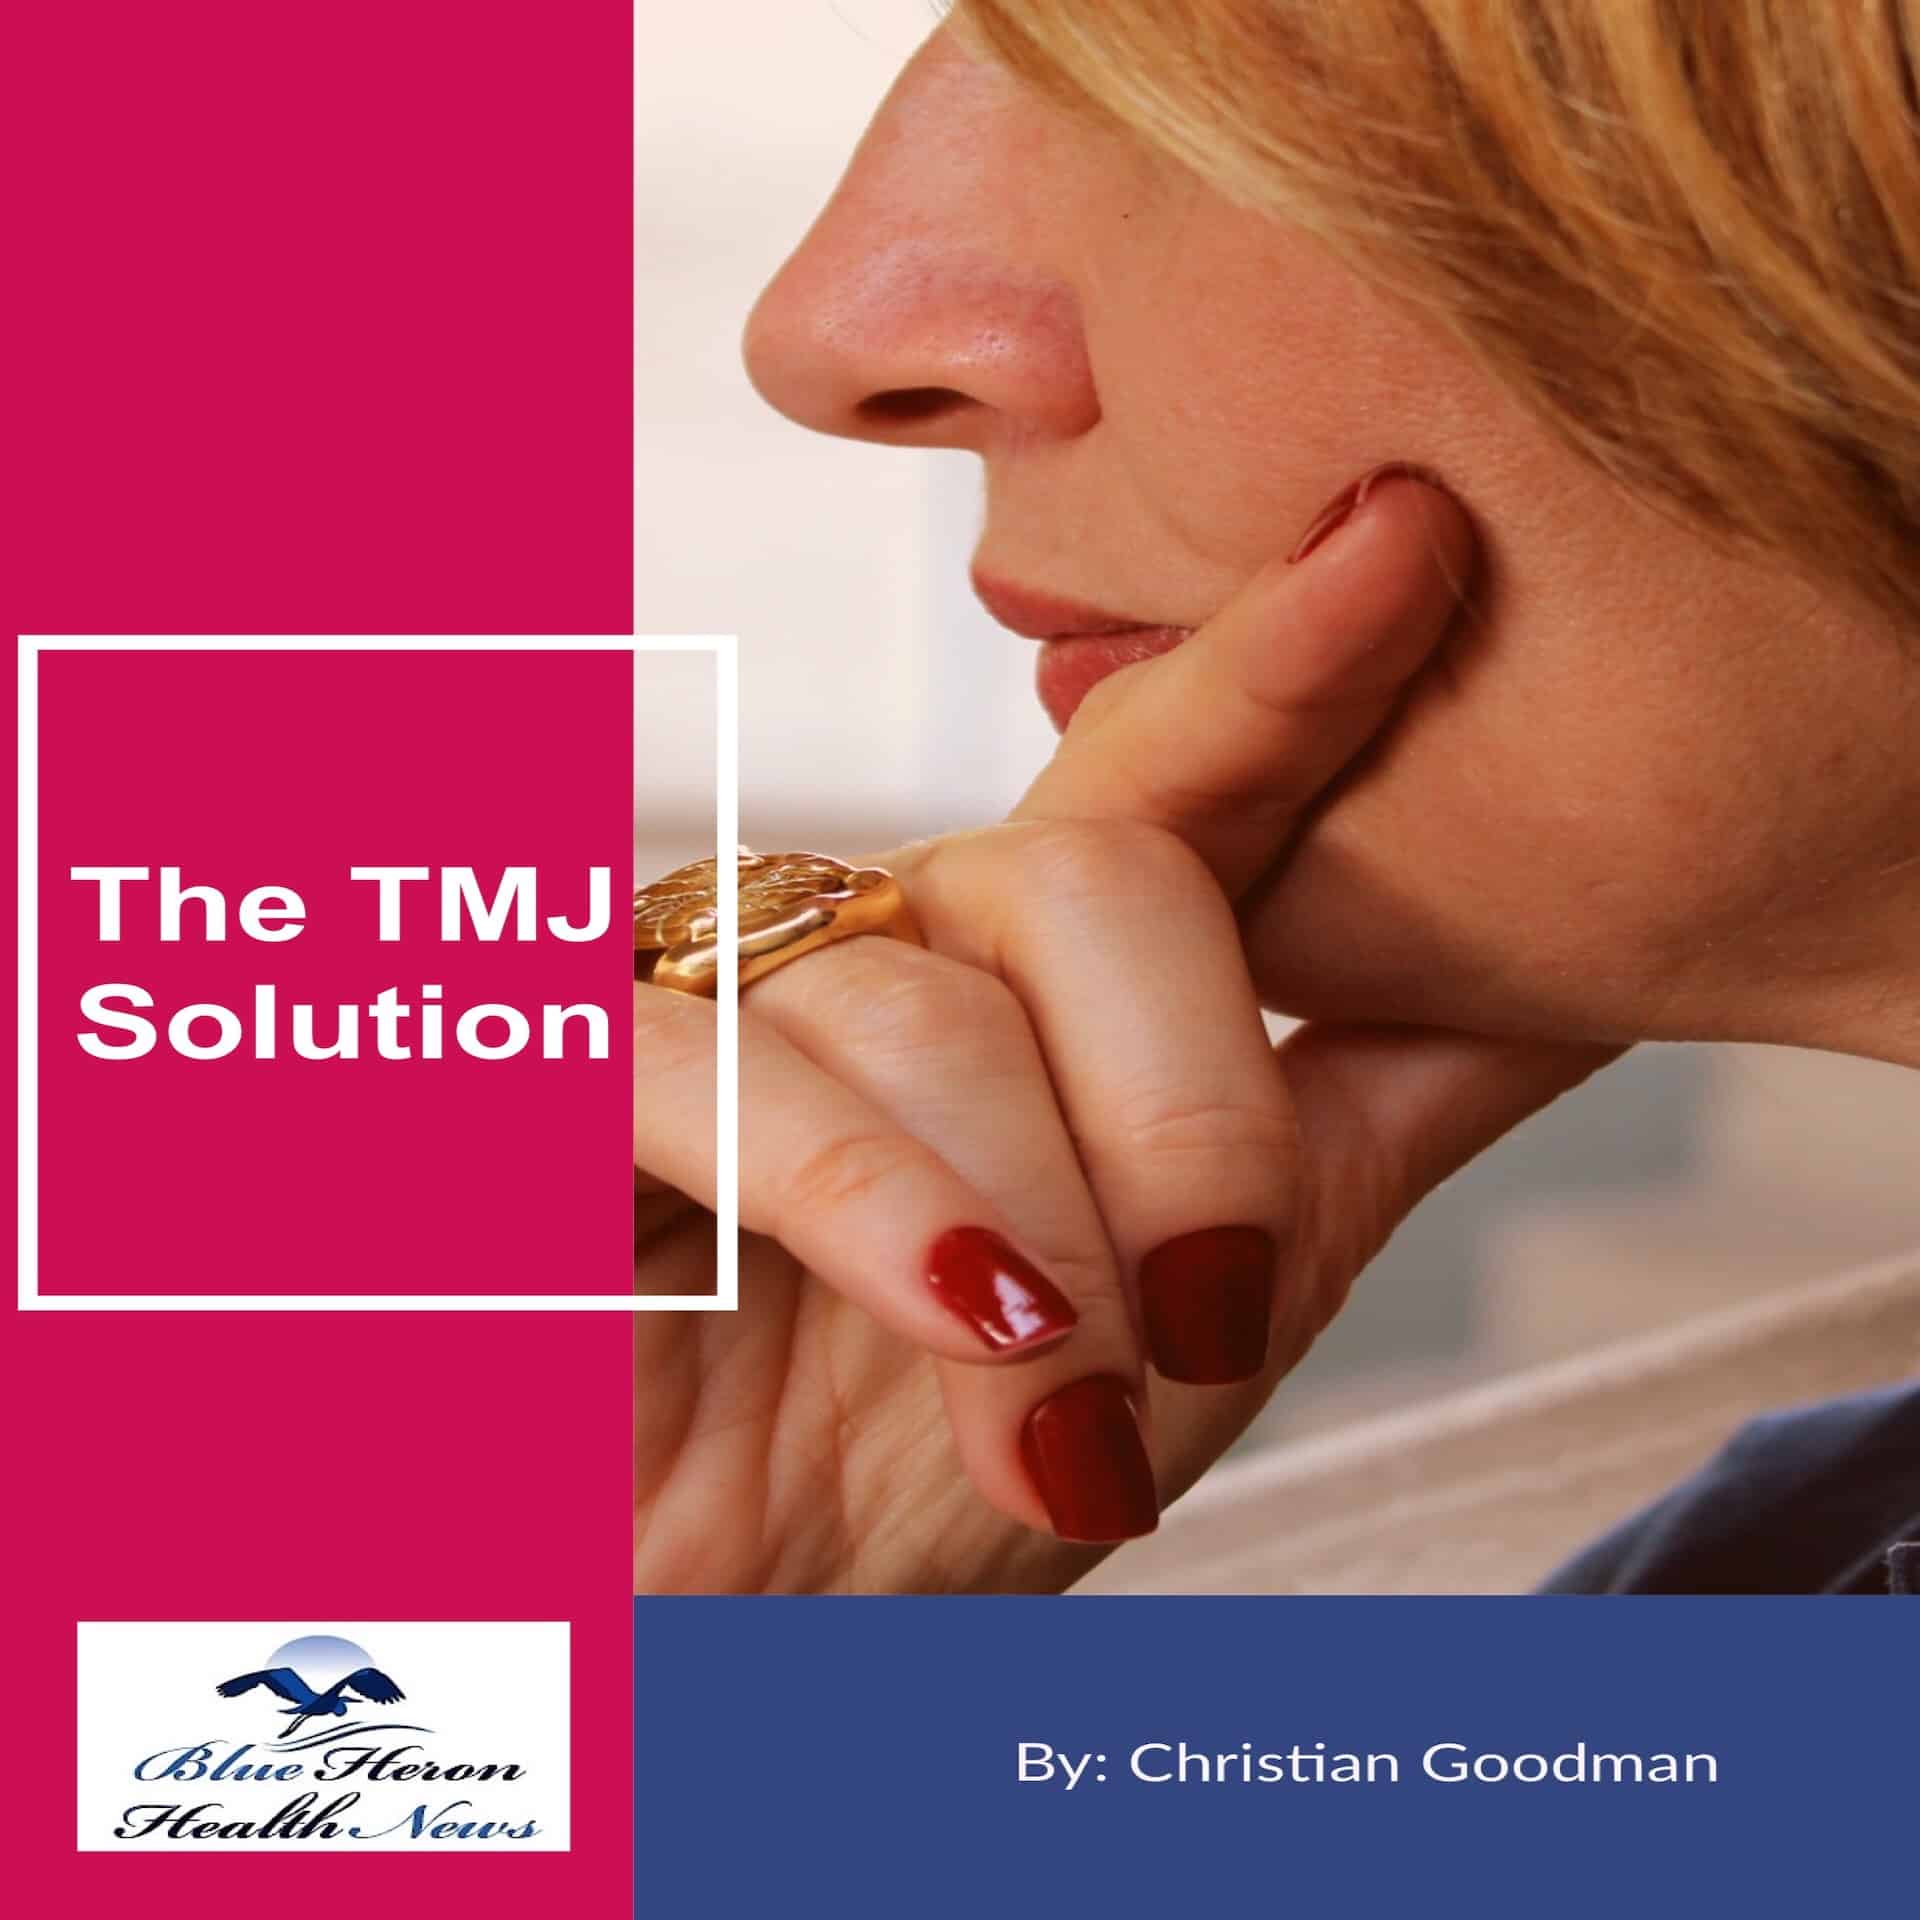 The TMJ Solution